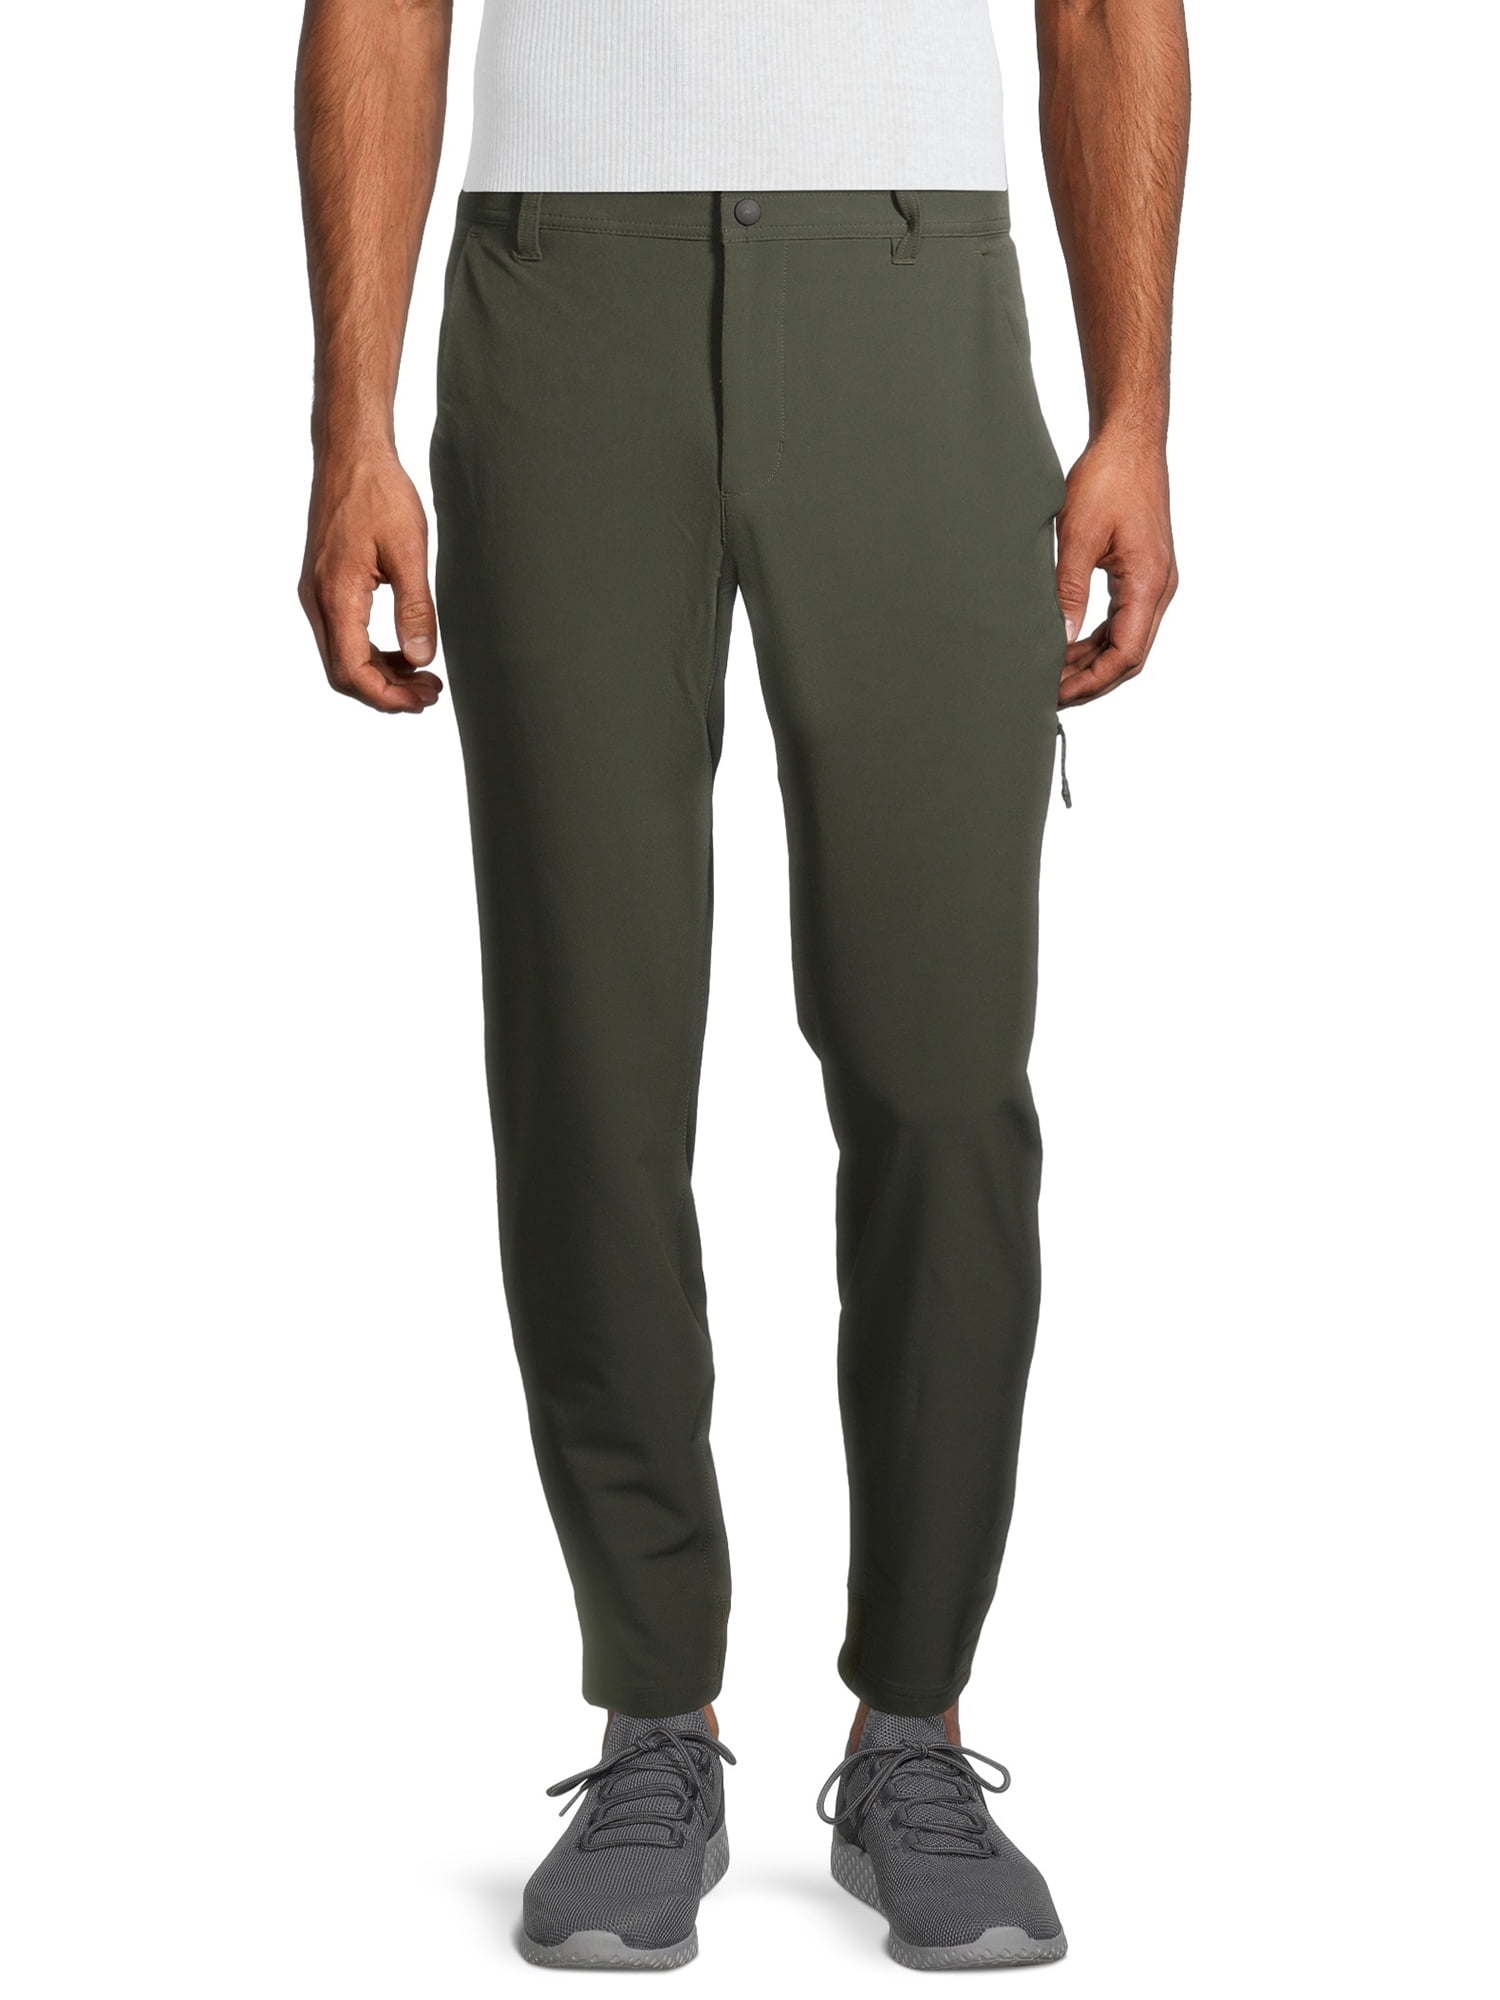 Russell Men's Athletic Woven Tech Pants, up to 5XL - Walmart.com